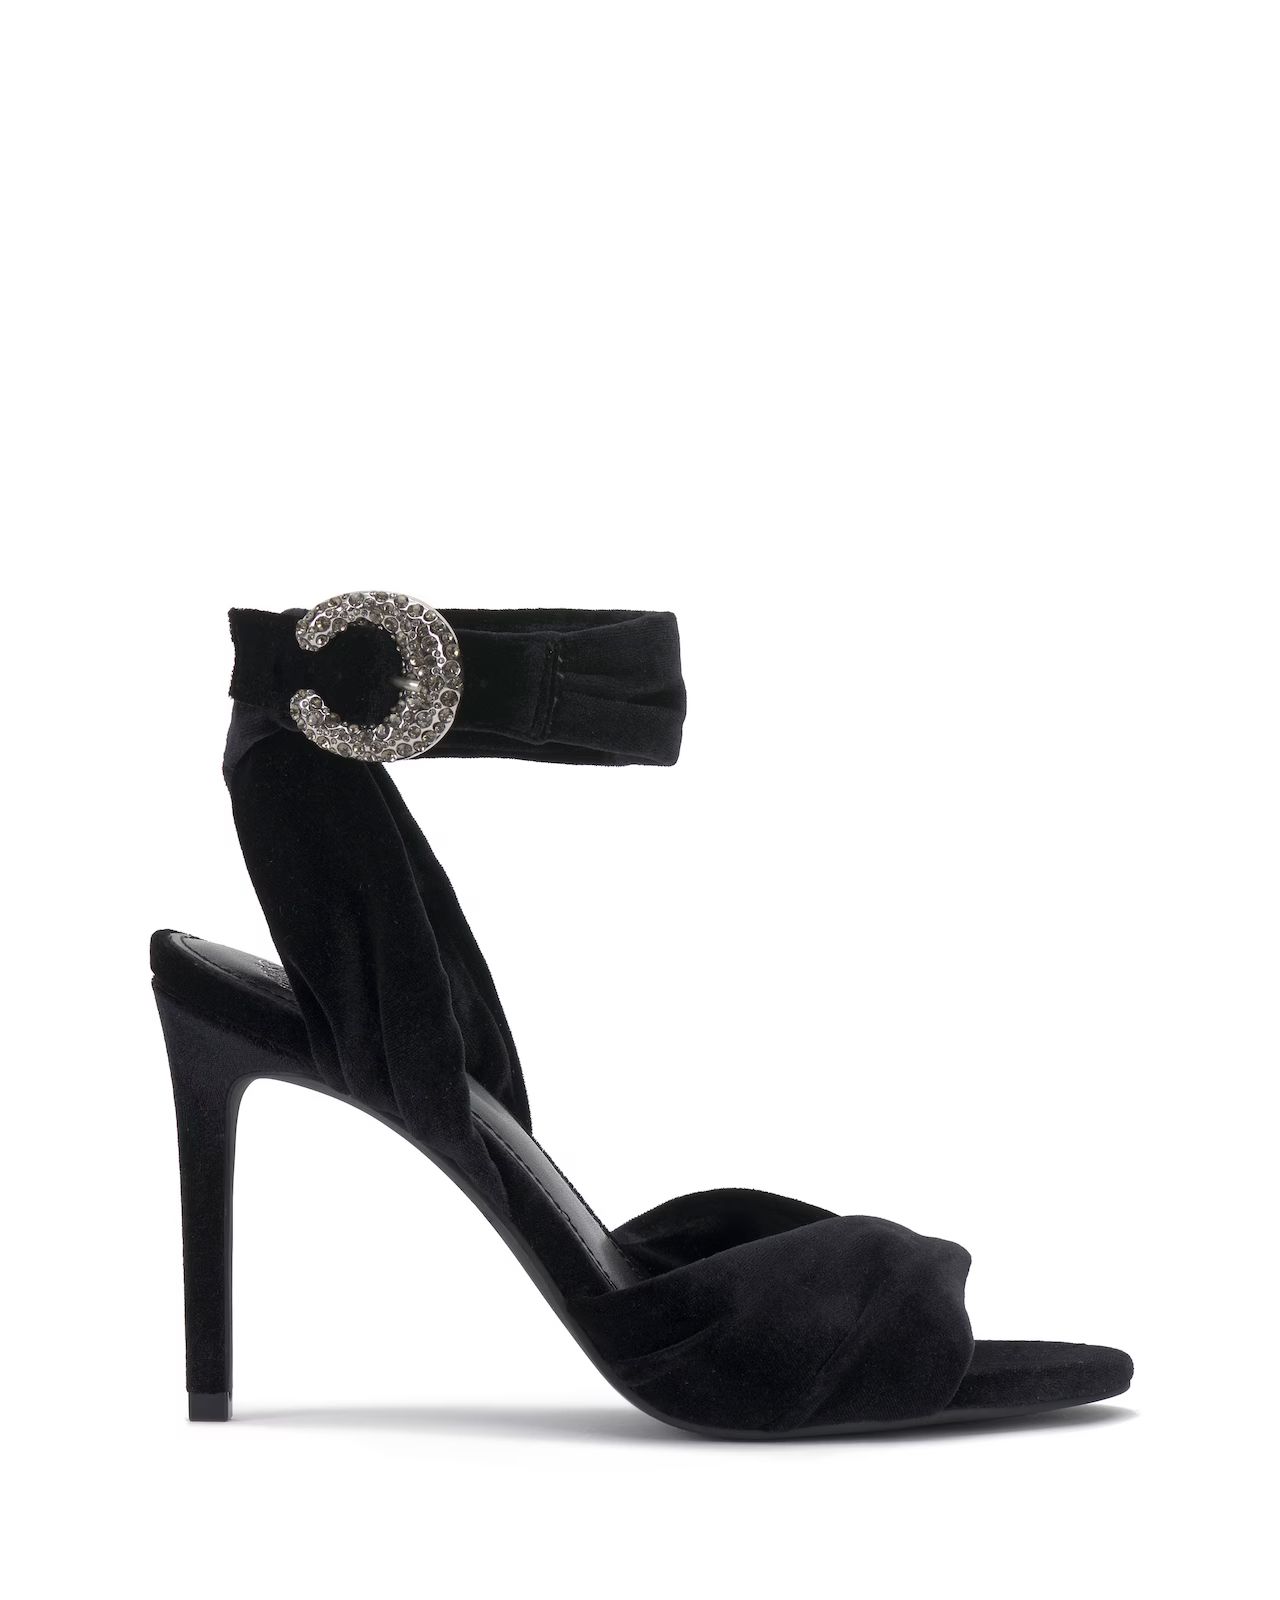 Vince Camuto Anyria Heel | Vince Camuto